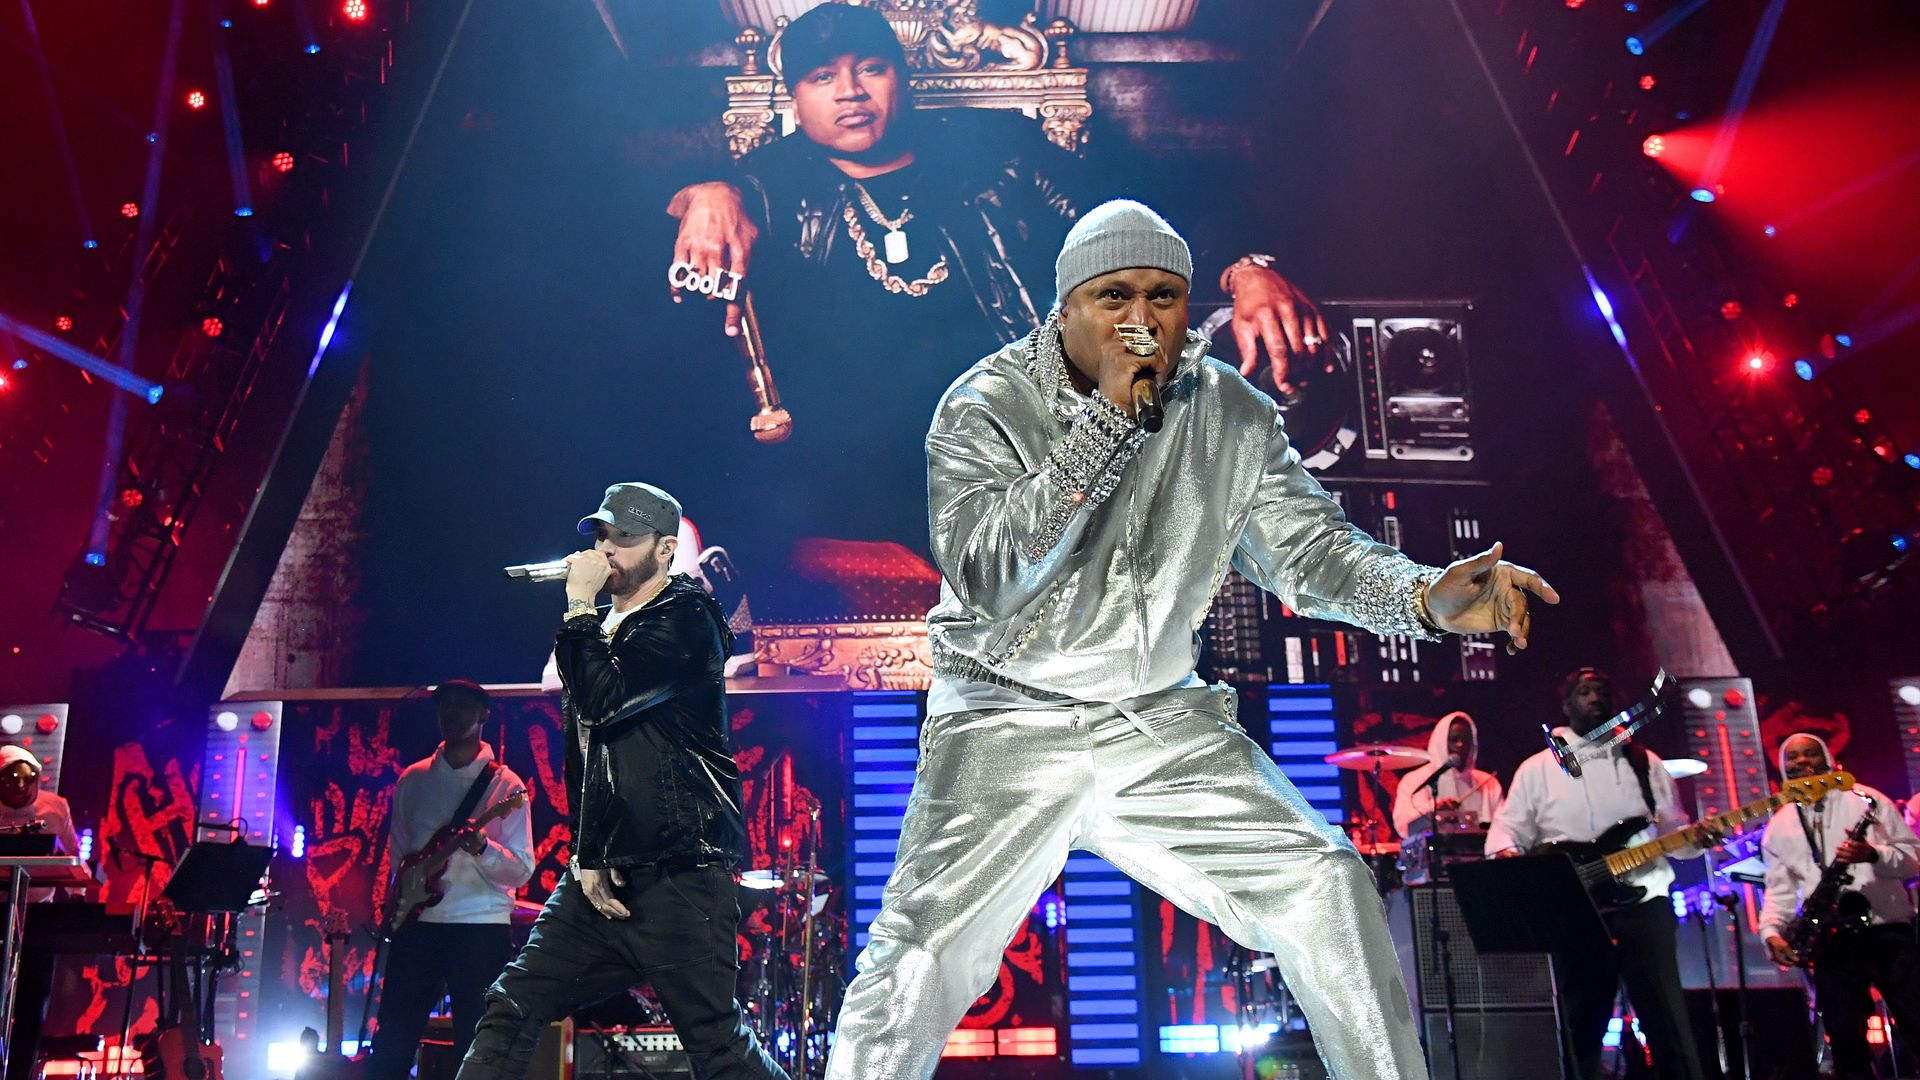 Eminem and LL Cool J perform on stage together at the Rock Hall ceremony.